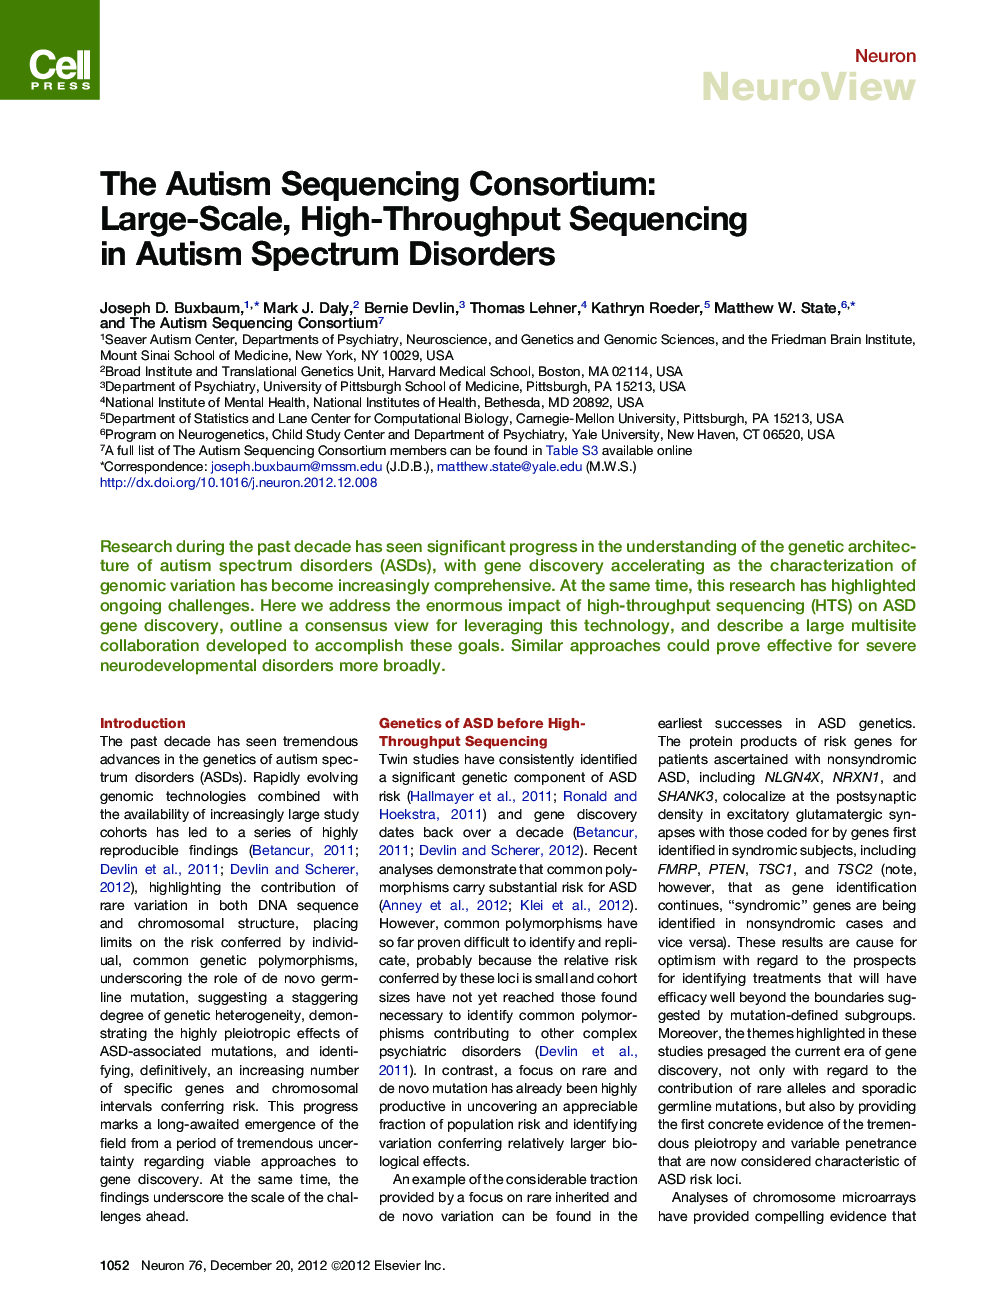 The Autism Sequencing Consortium: Large-Scale, High-Throughput Sequencing in Autism Spectrum Disorders